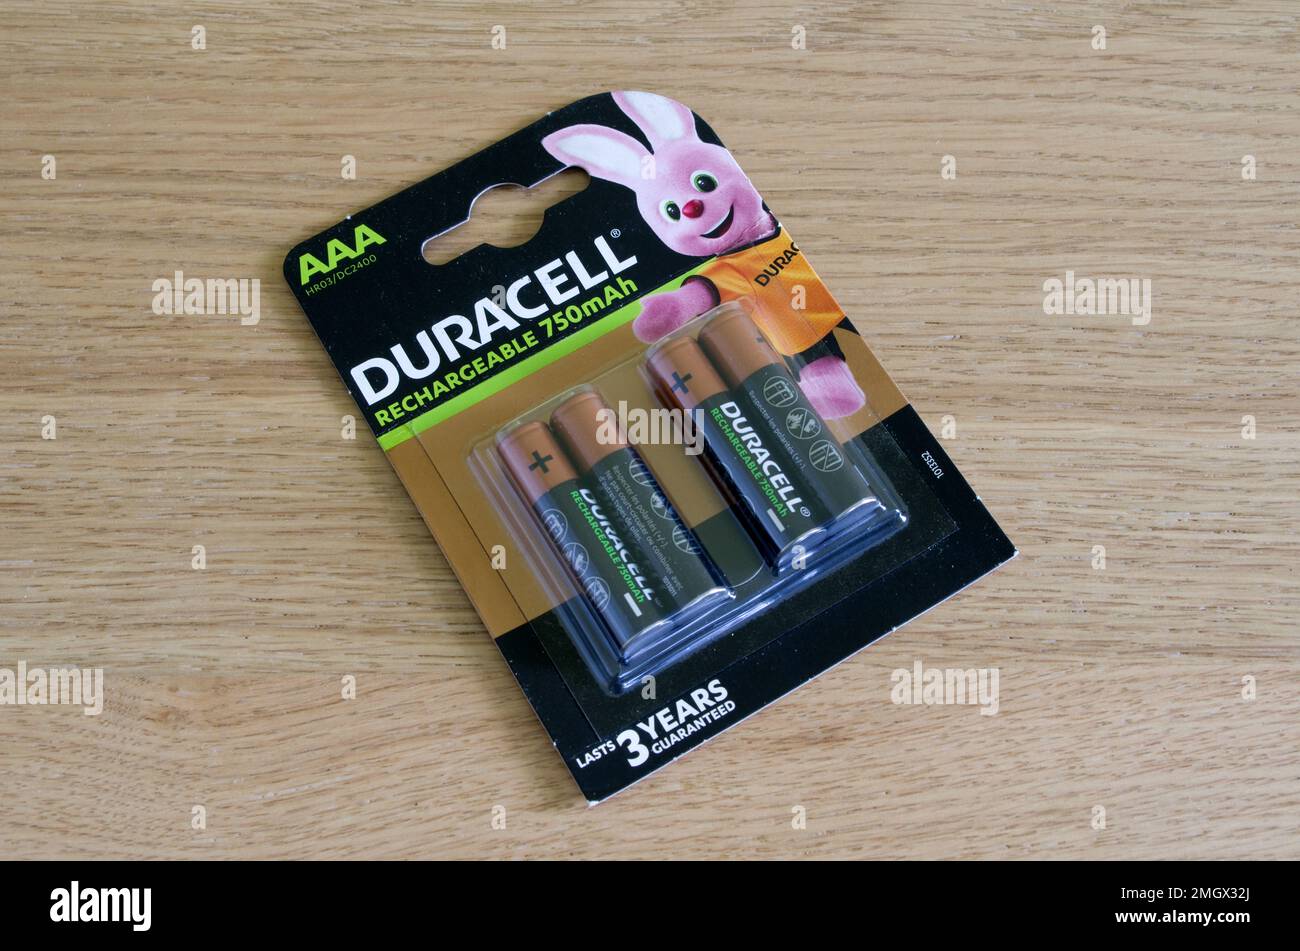 Duracell AAA Alkaline Rechargeable 750 mAh Batteries Stock Photo - Alamy